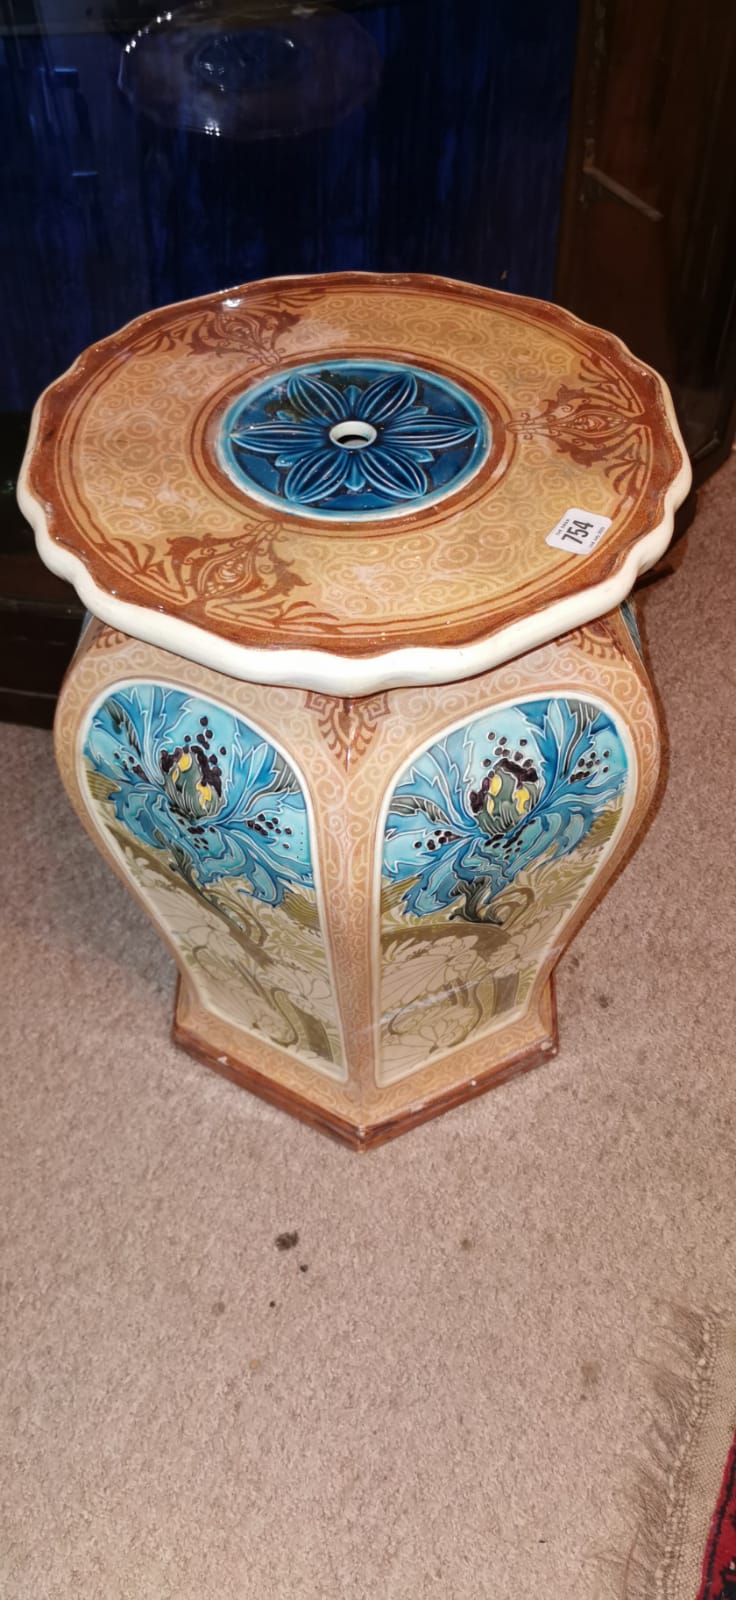 ATTRIBUTED TO MINTONS A 19TH CENTURY HEXAGONAL MAJOLICA JARDINIÈRE STAND Decorated in relief with